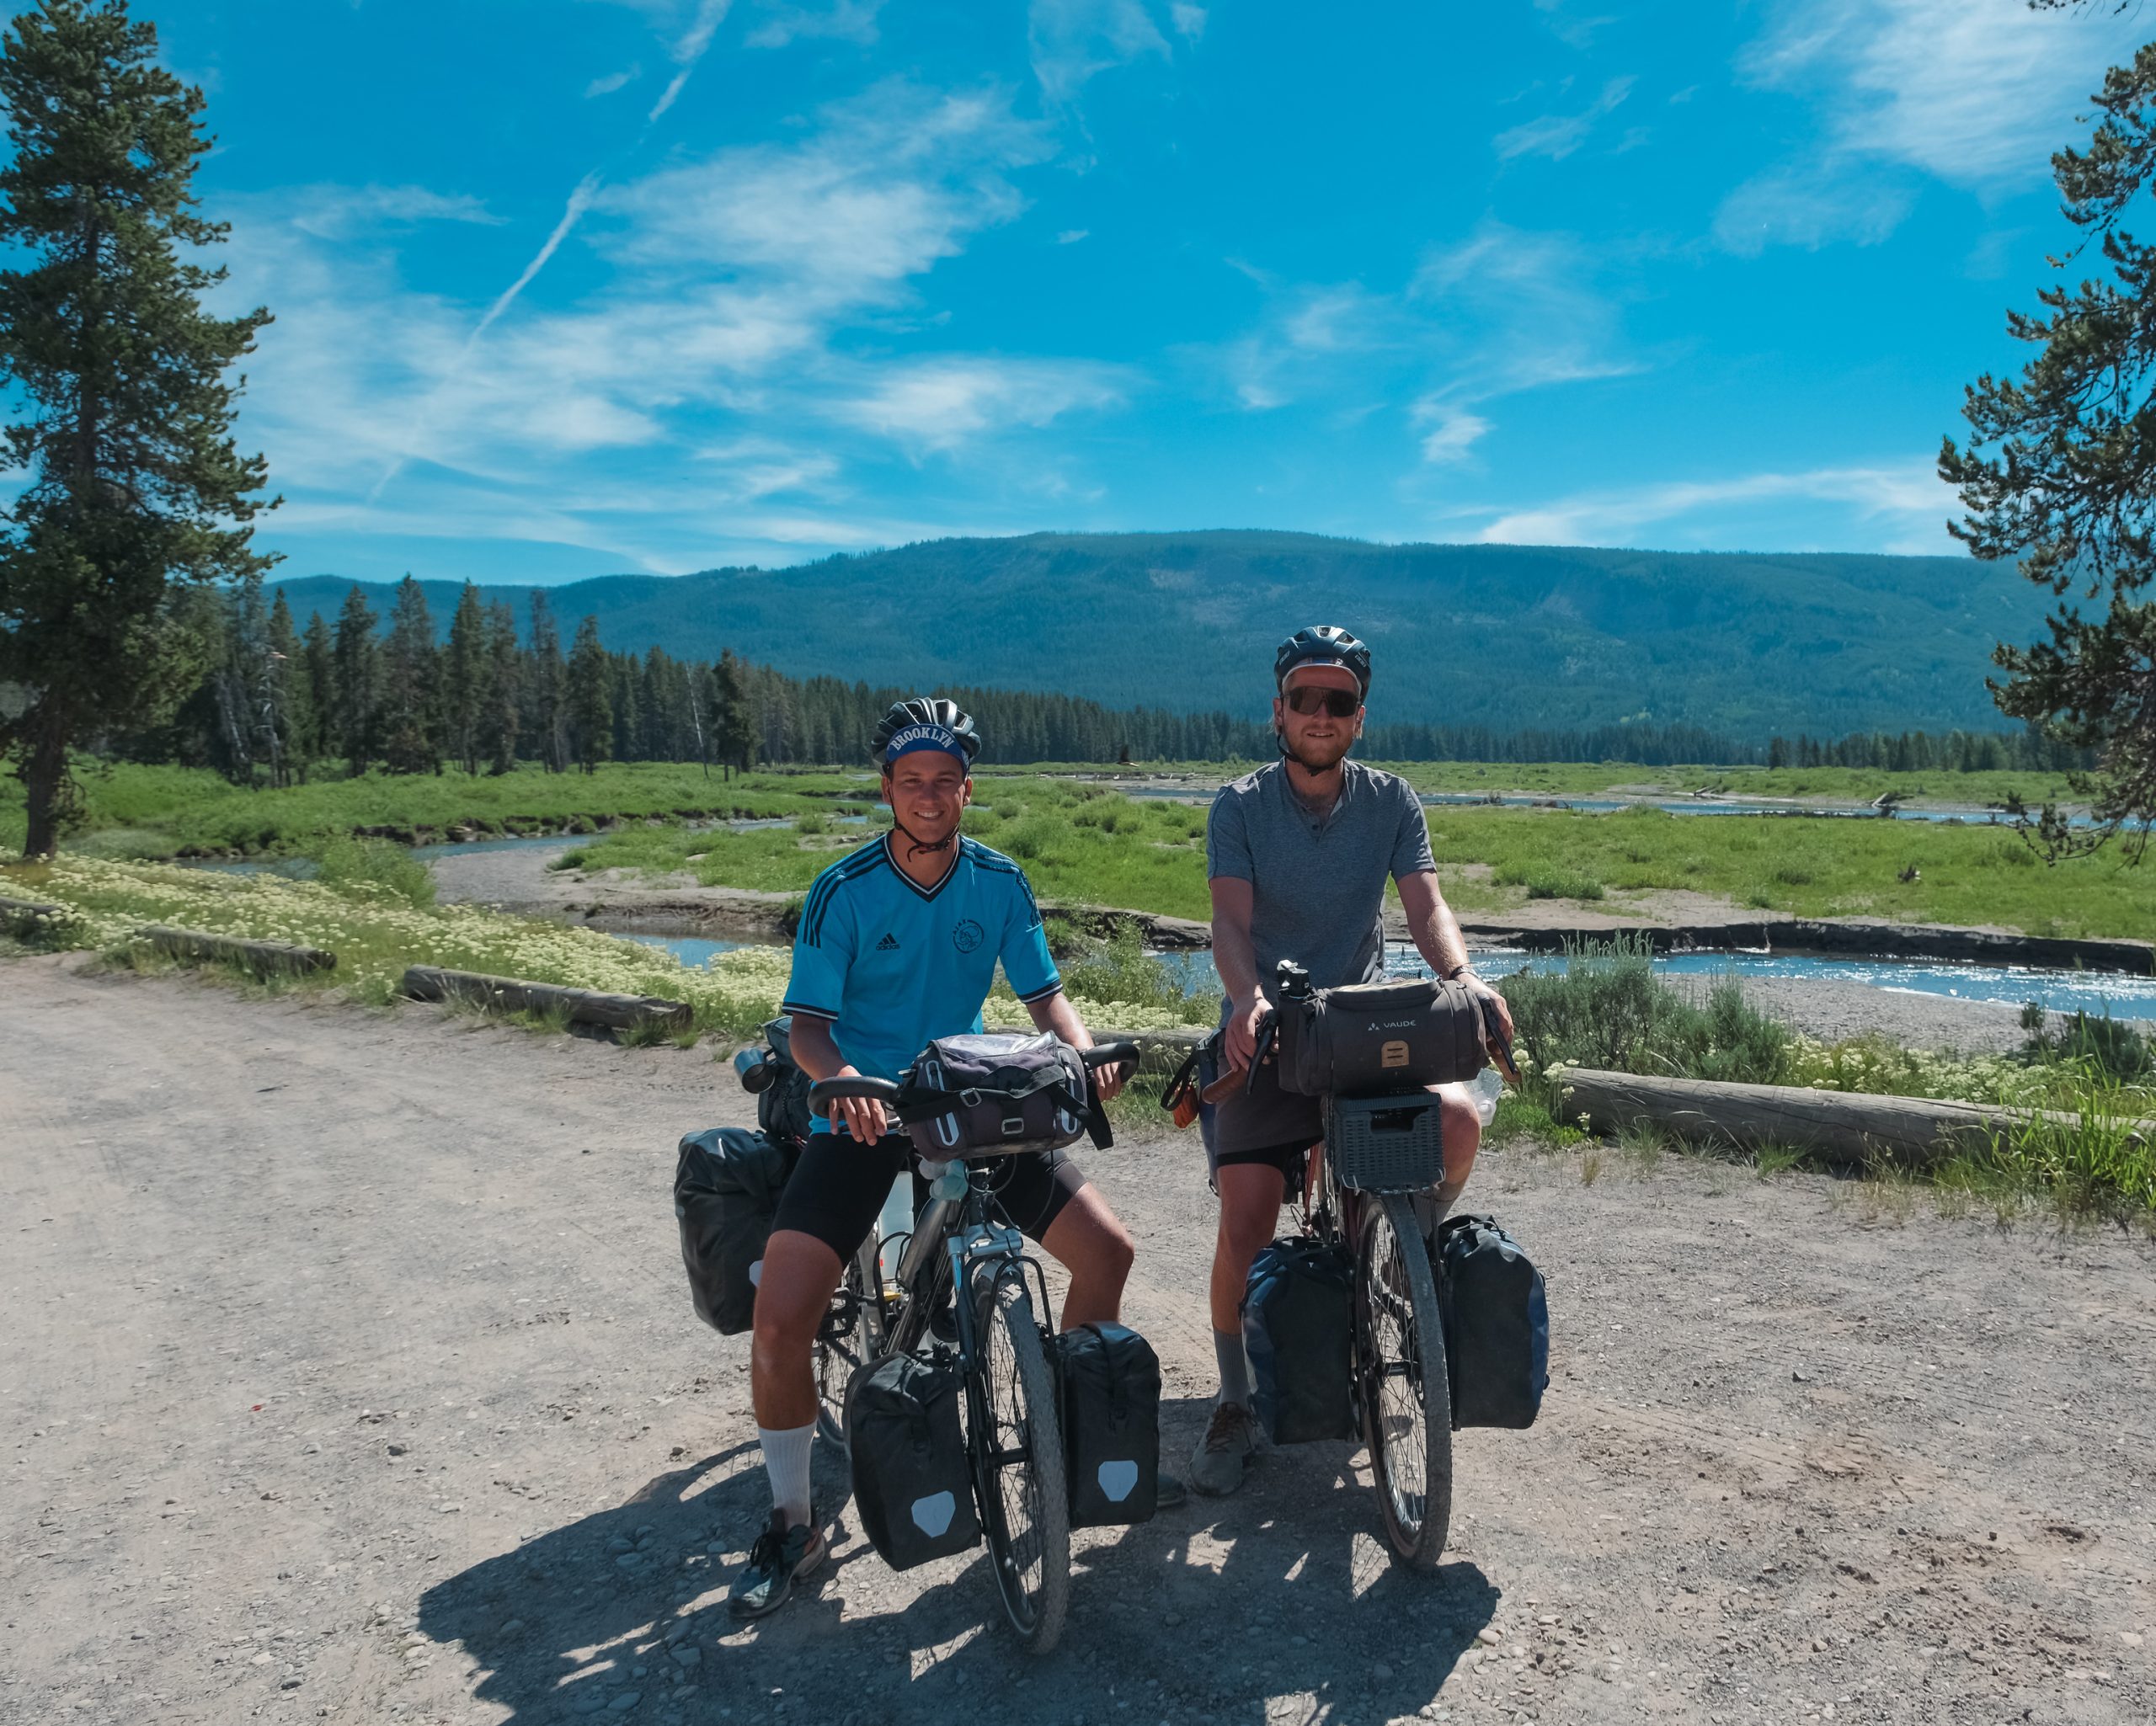 Jacko and Marijn, cycling through Canada and America all the way to South America